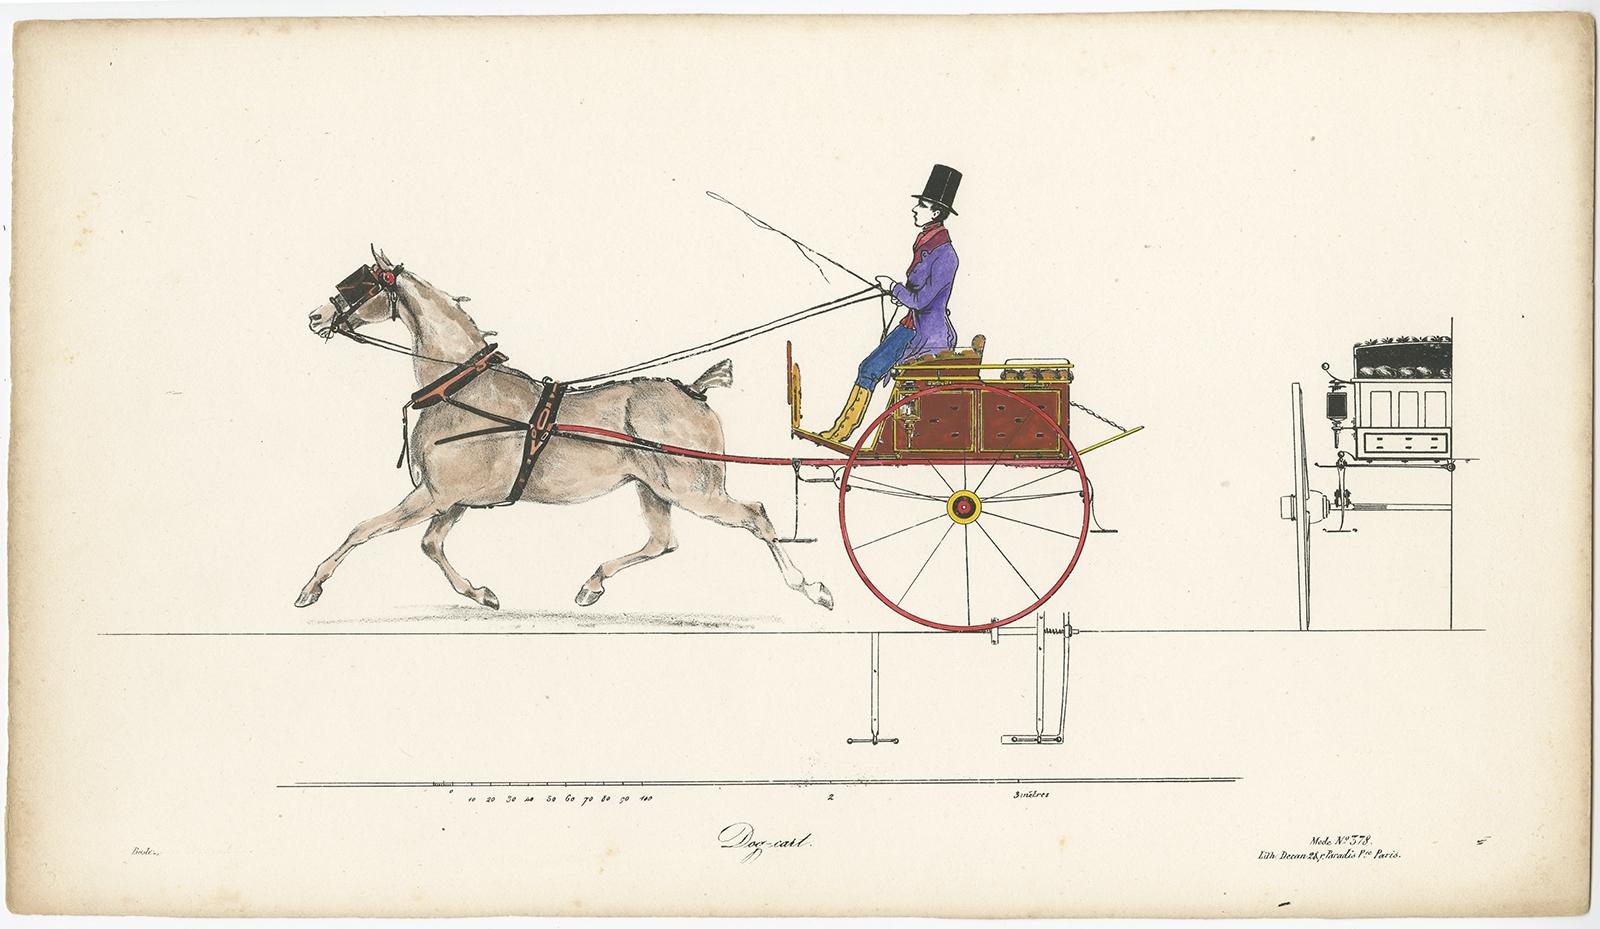 Antique print of horse and carriage titled 'Dog-cart'. This print is designed by Baslez.

Artists and Engravers: Engraved by Decan, Paris. 

Condition: Very good, please study image carefully.